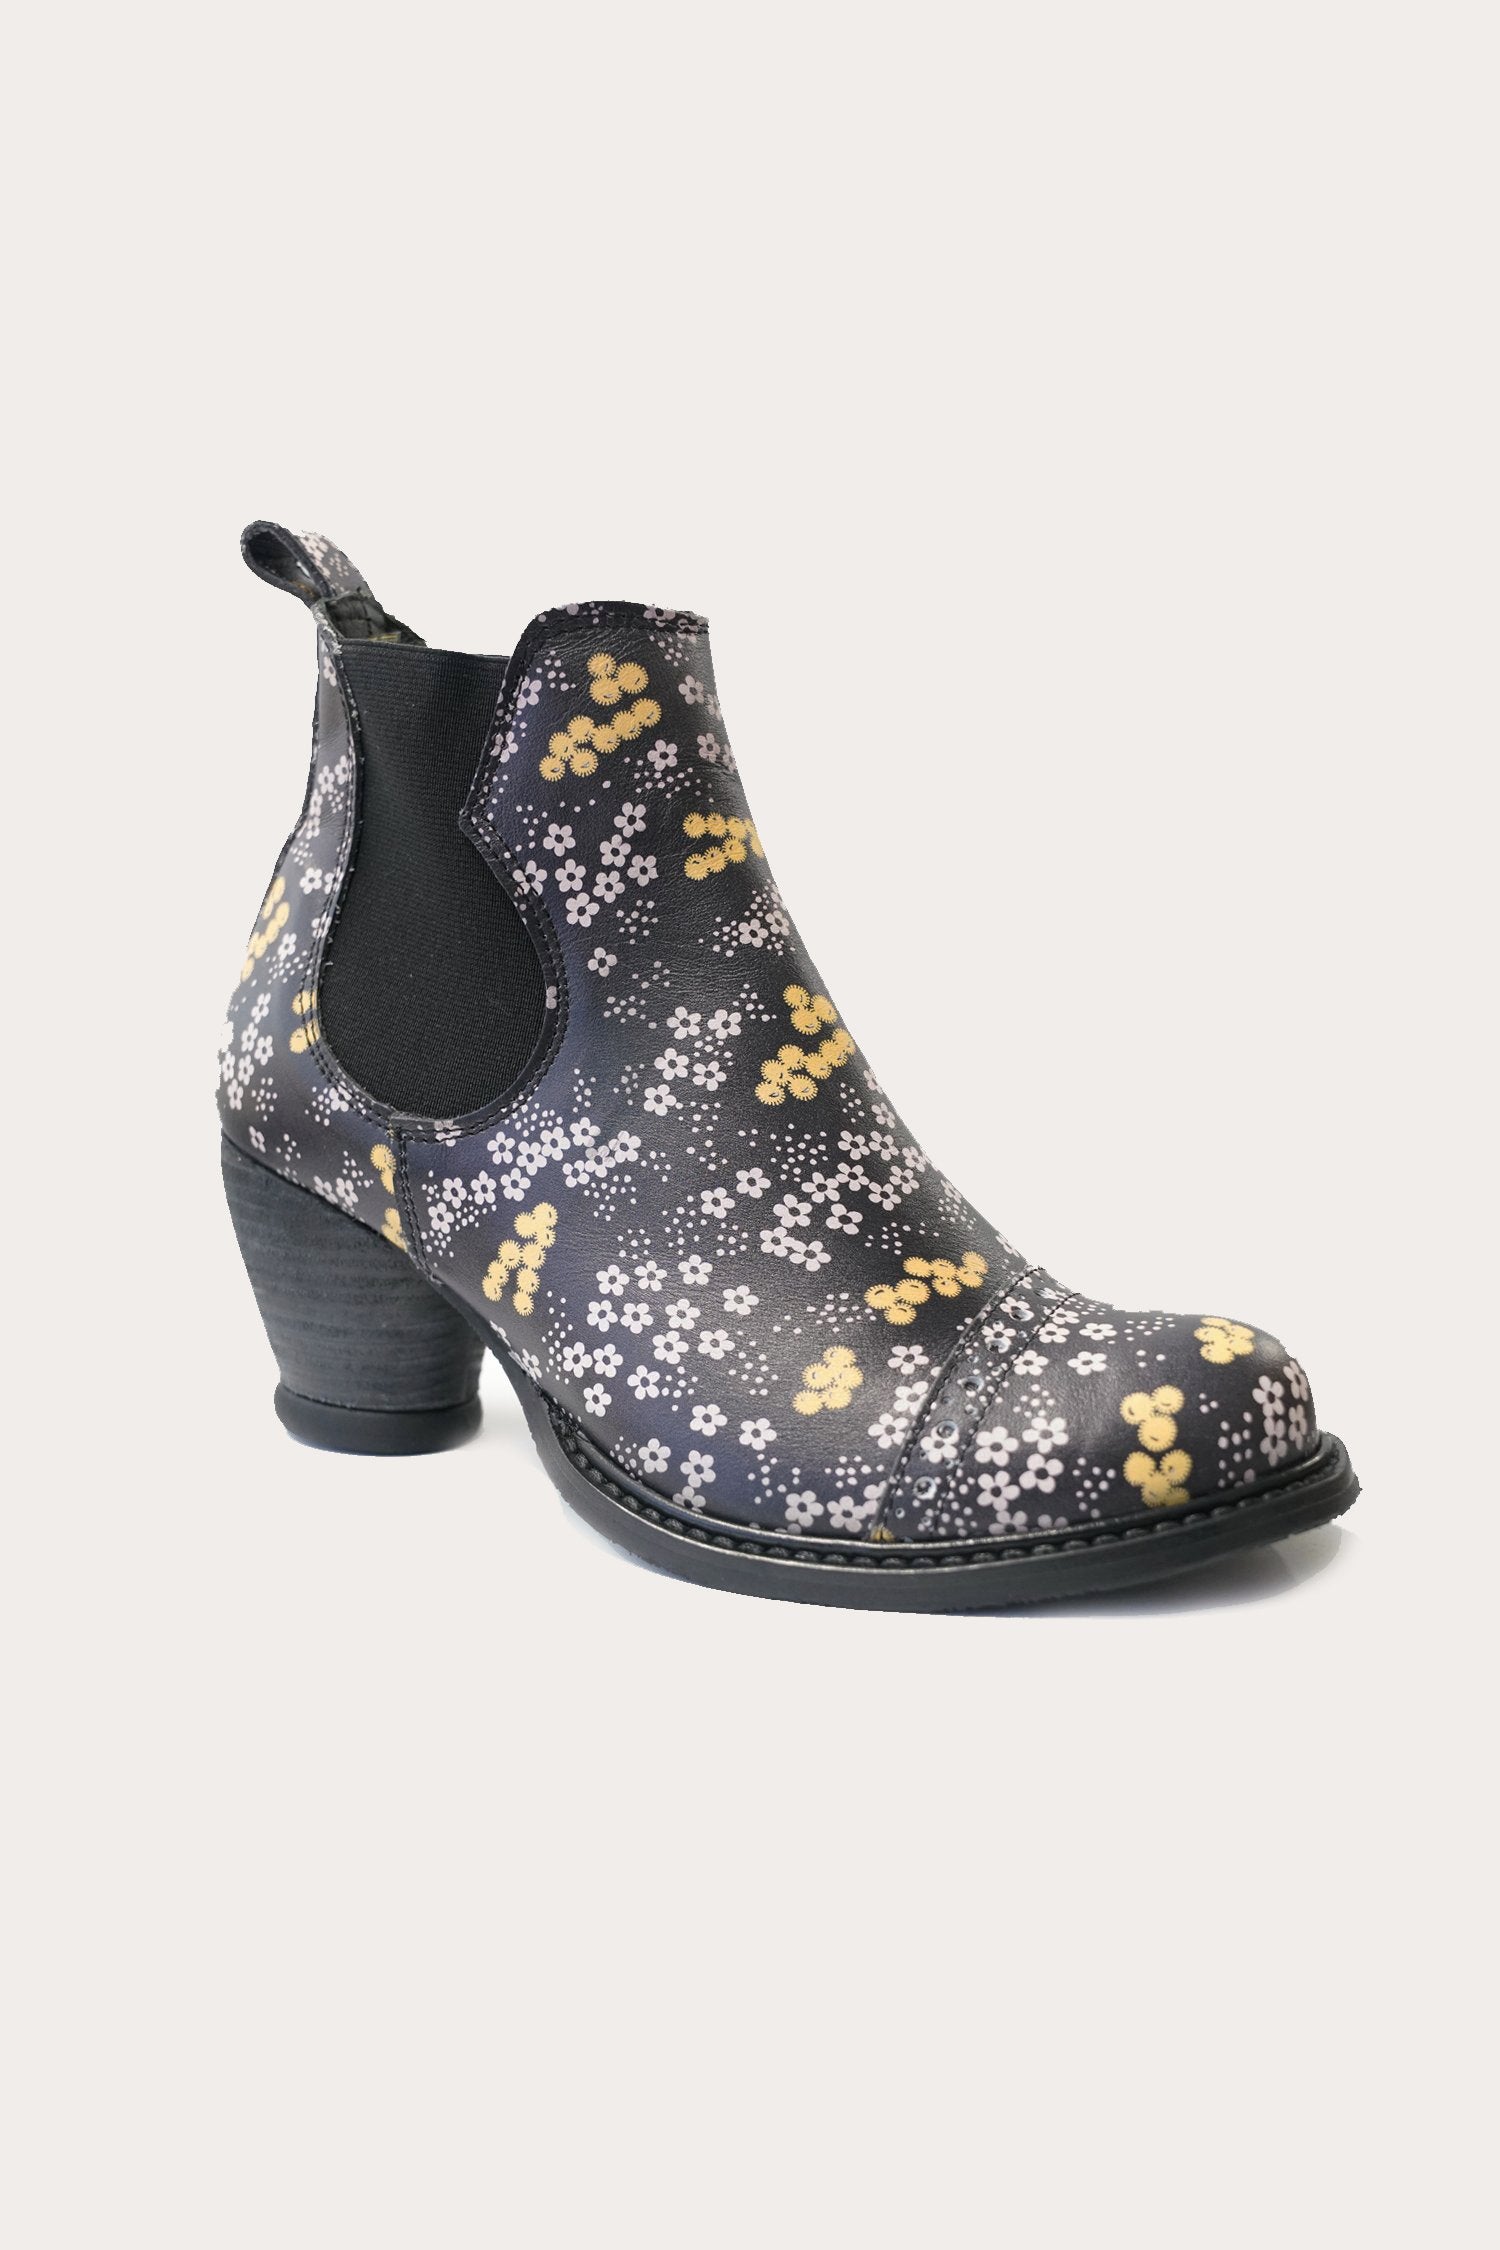 Ditsy Blooms Boot, black high heel, white/yellow floral design, black side elastic, strap on the back 